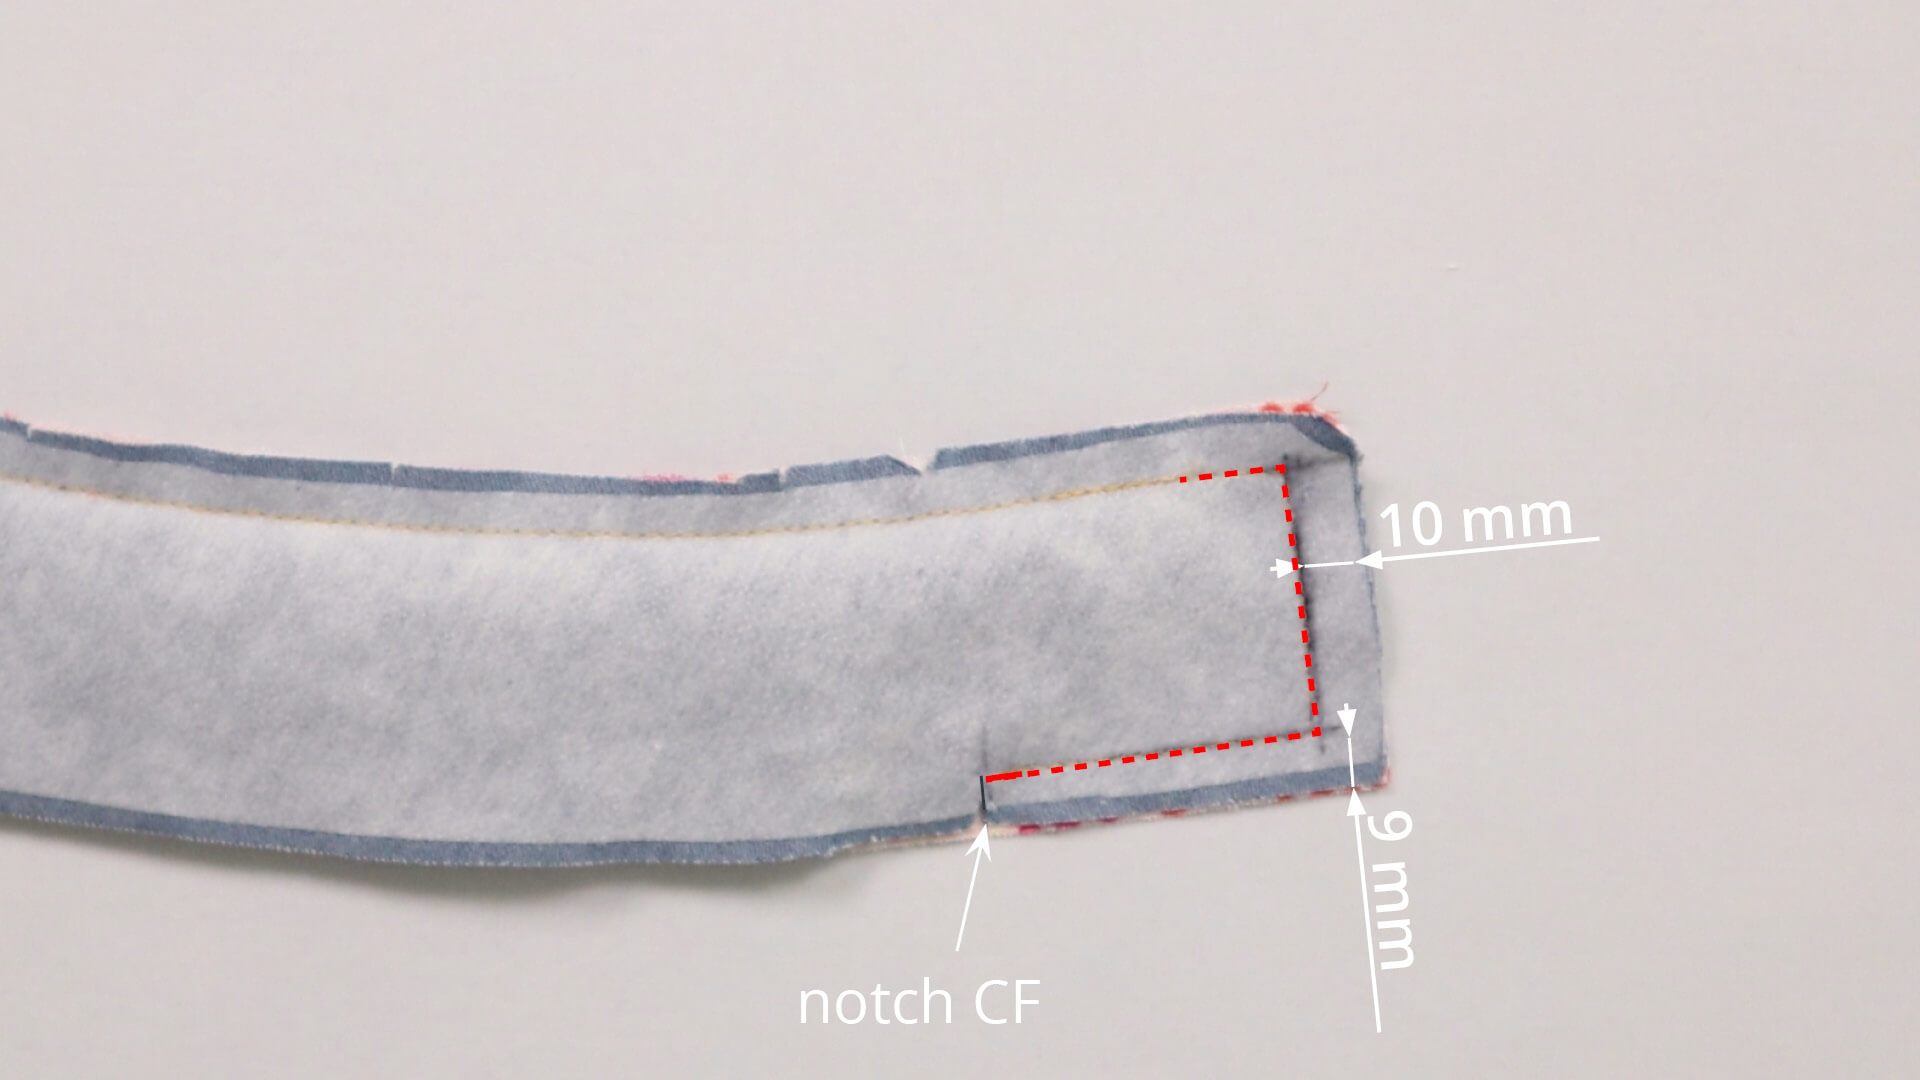 The picture shows how the waistband extension is marked at the transition.